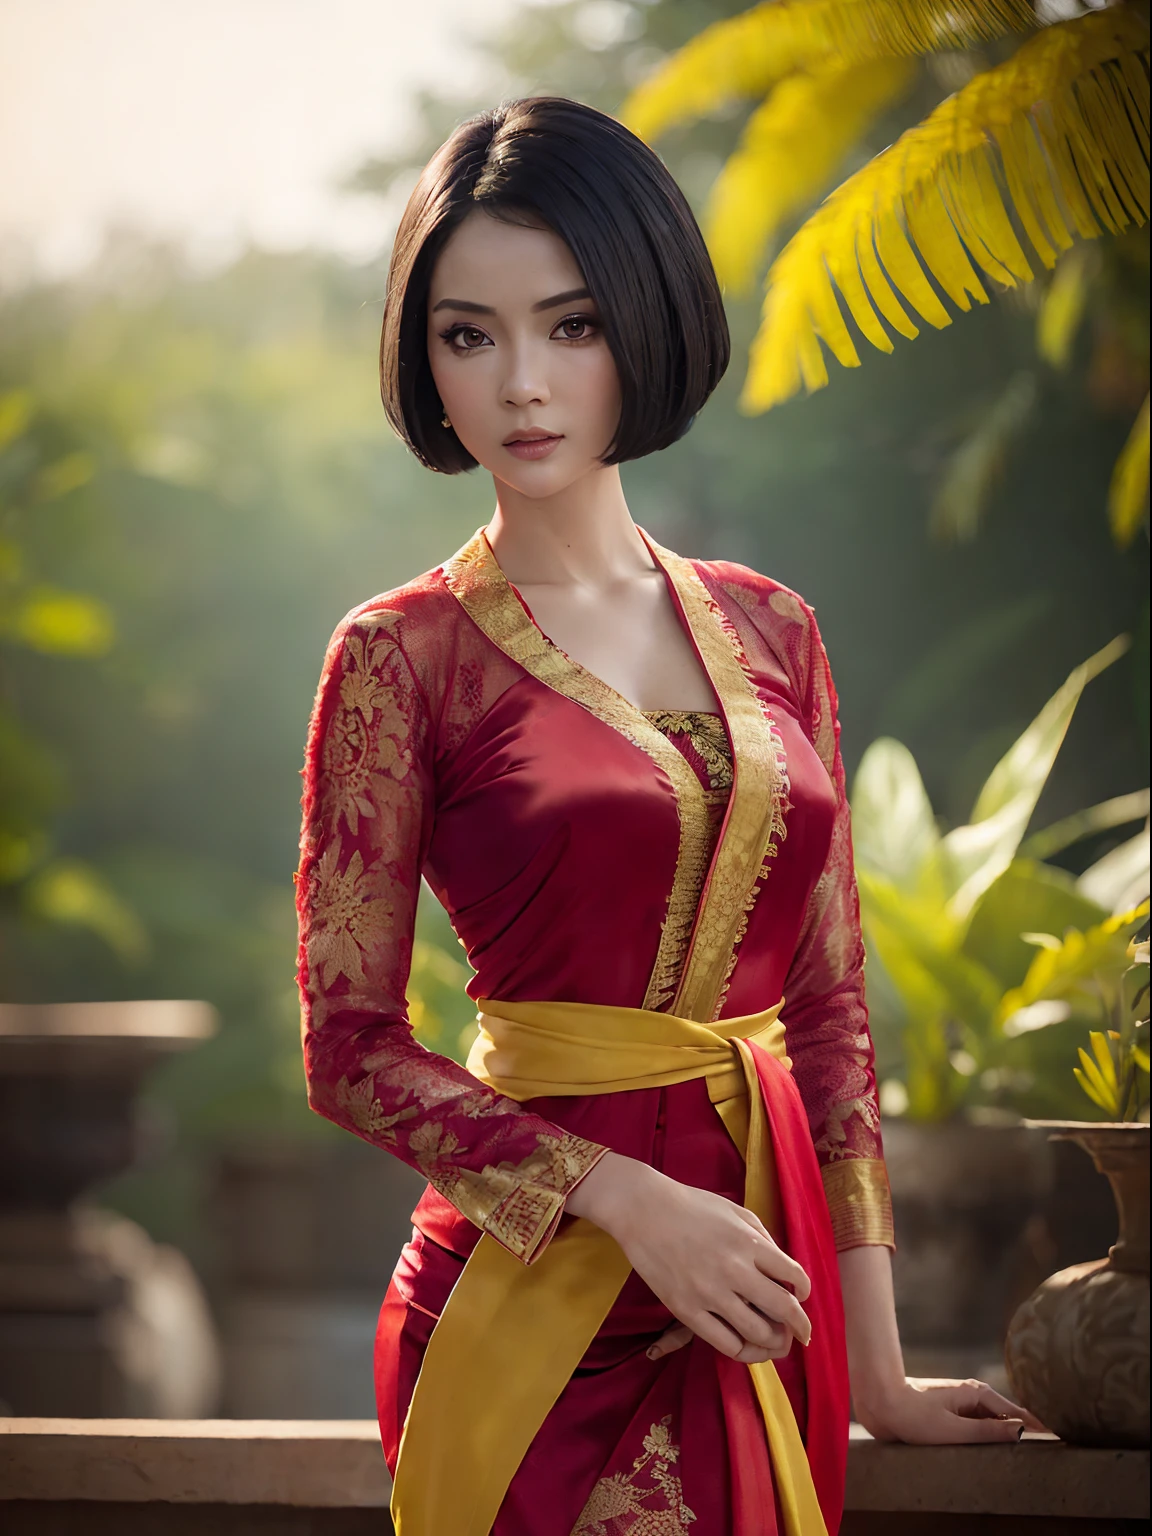 Photorealistic Production, (One Person), (Realistic Image of a 25 Years Old Female Model), (Short Bob Black Hair:1.6), (Pale Skin:1.4), (Wearing a Red Ornated Kebaya Dress with Silk Cloth:1.6), (Serious Face), (Deep Cleavage), (Elegant Pose:1.4), Centered, (Waist-up Shot:1.4), From Front Shot, Insane Details, Intricate Face Detail, Intricate Hand Details, Cinematic Shot and Lighting, Realistic Colors, Masterpiece, Sharp Focus, Ultra Detailed, Taken with DSLR camera, Realistic Photography, Depth of Field, Incredibly Realistic Environment and Scene, Master Composition and Cinematography